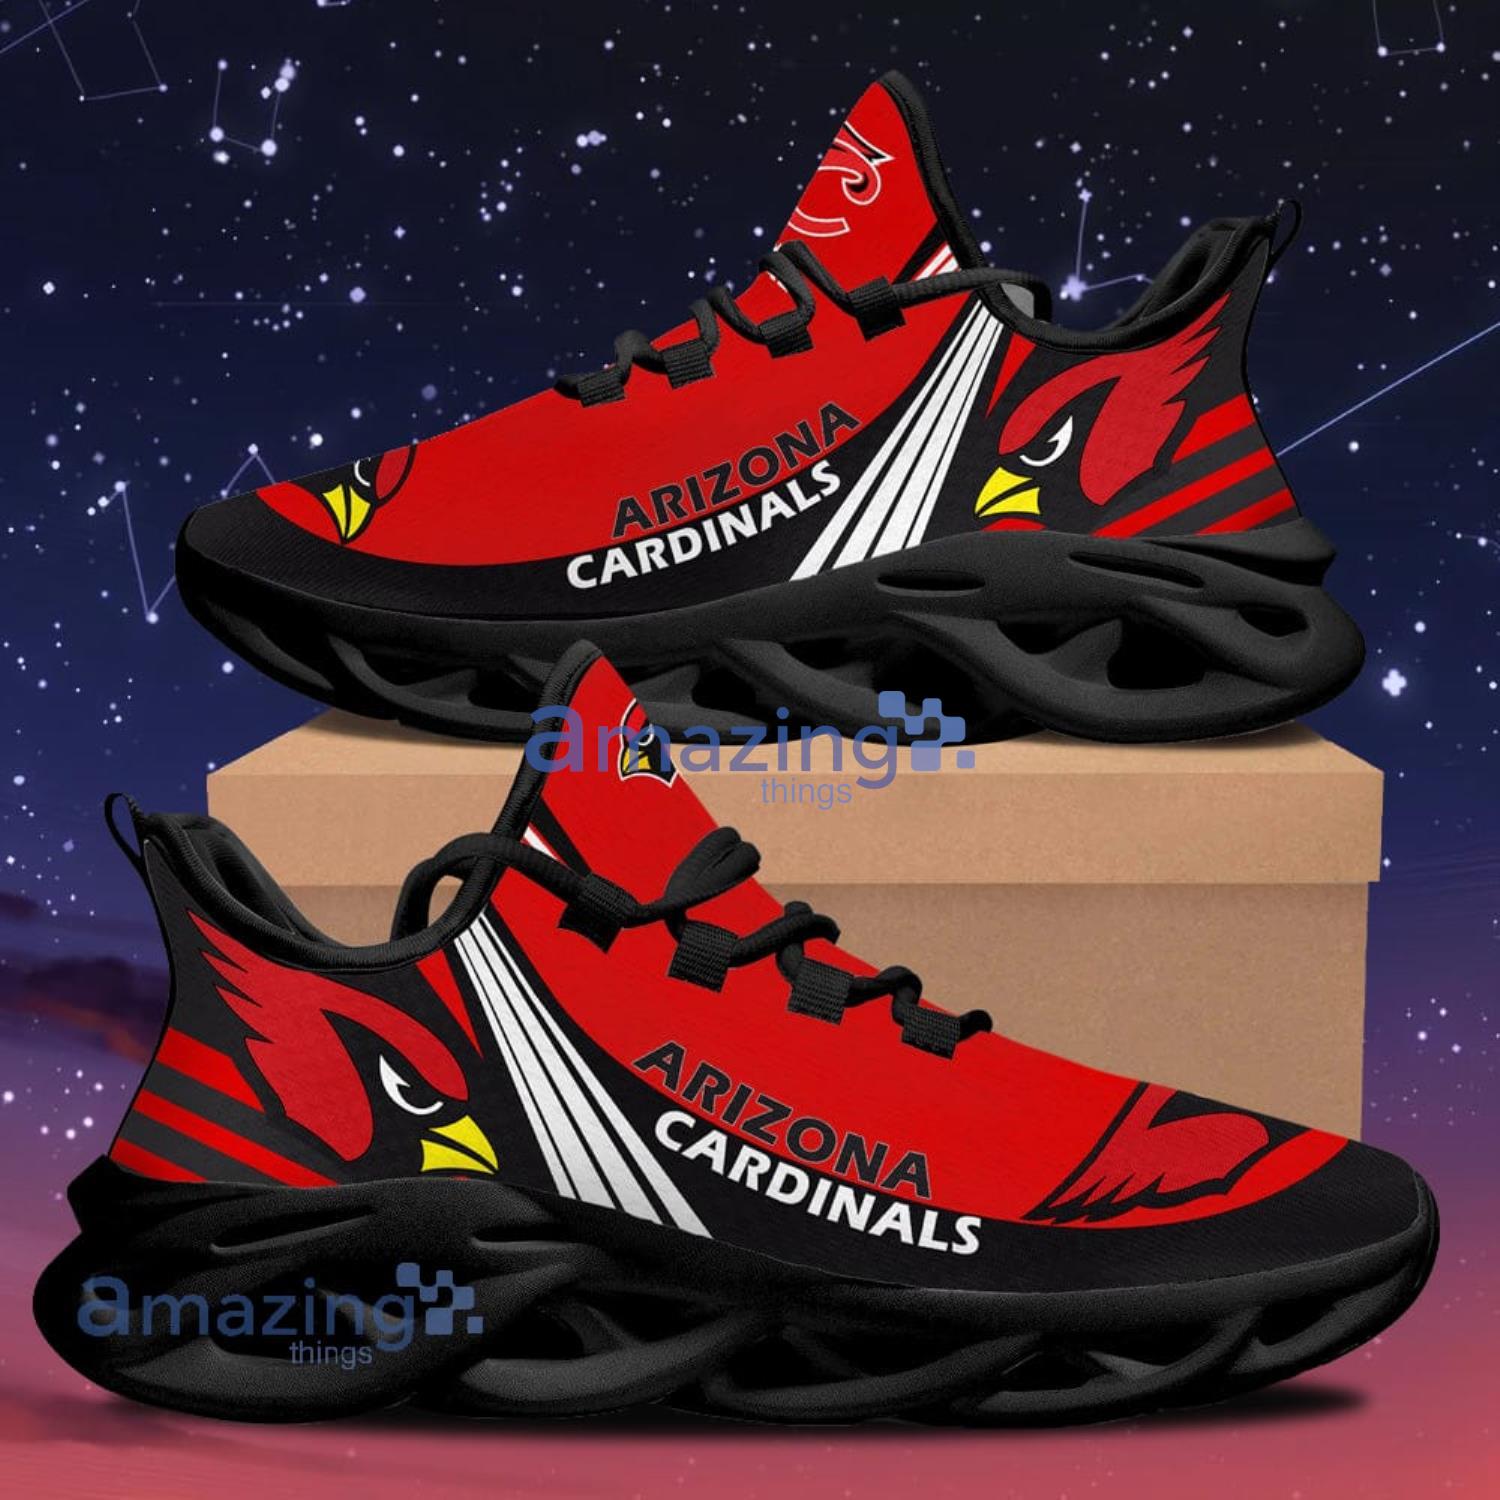 Arizona Cardinals New Trend Max Soul Shoes Running Sneakers Product Photo 1